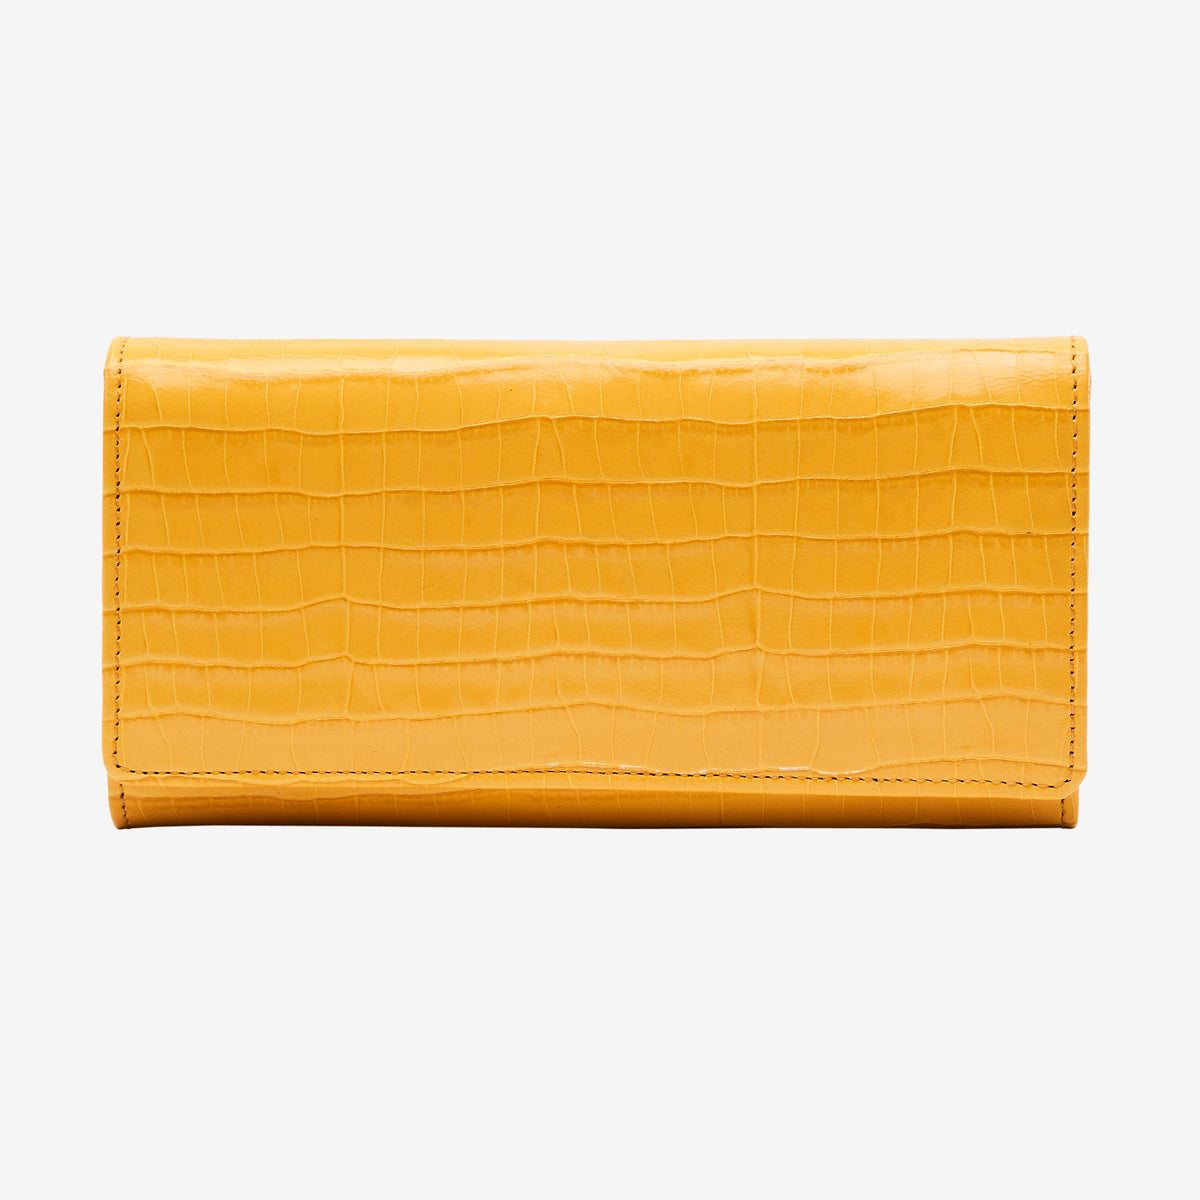     tusk-376-embossed-croco-leather-snap-over-wallet-golden-front